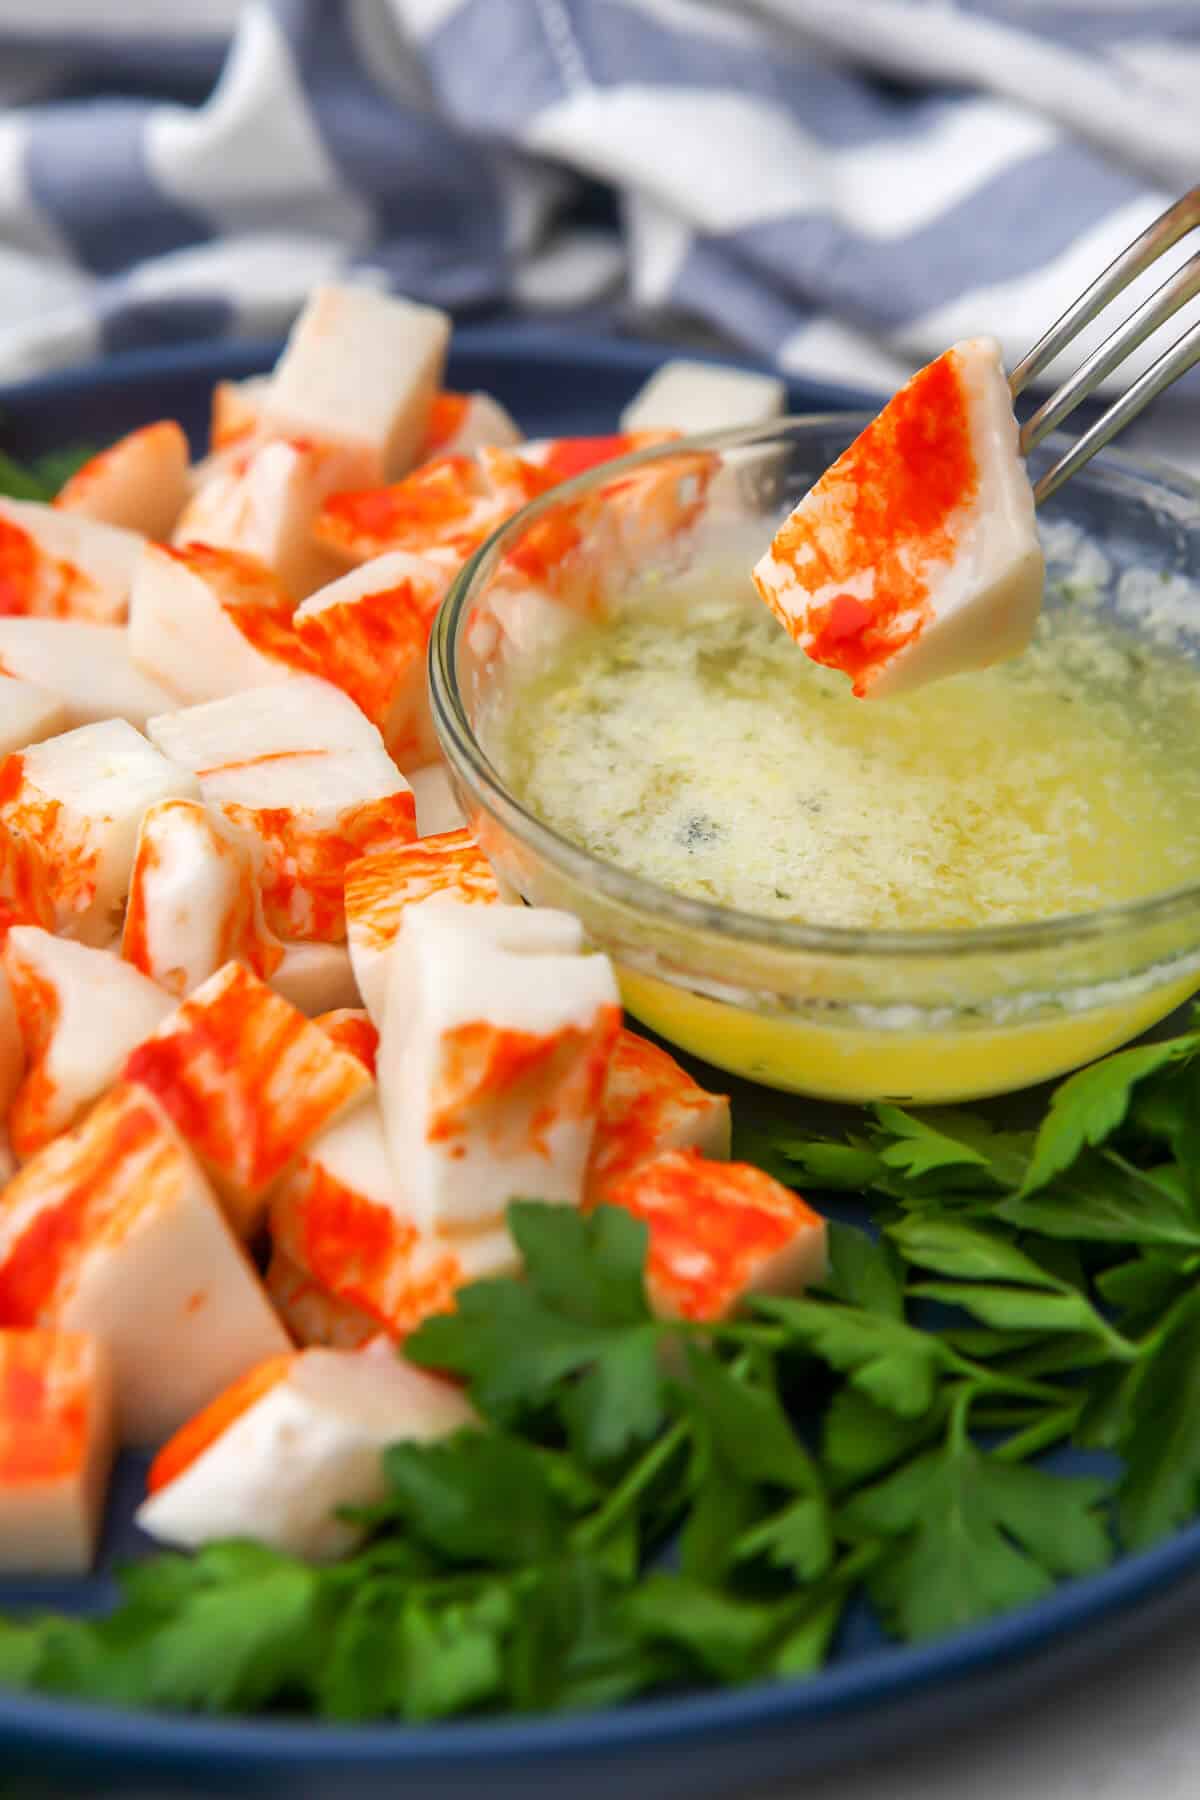 Vegan lobster being dipped into melted butter.